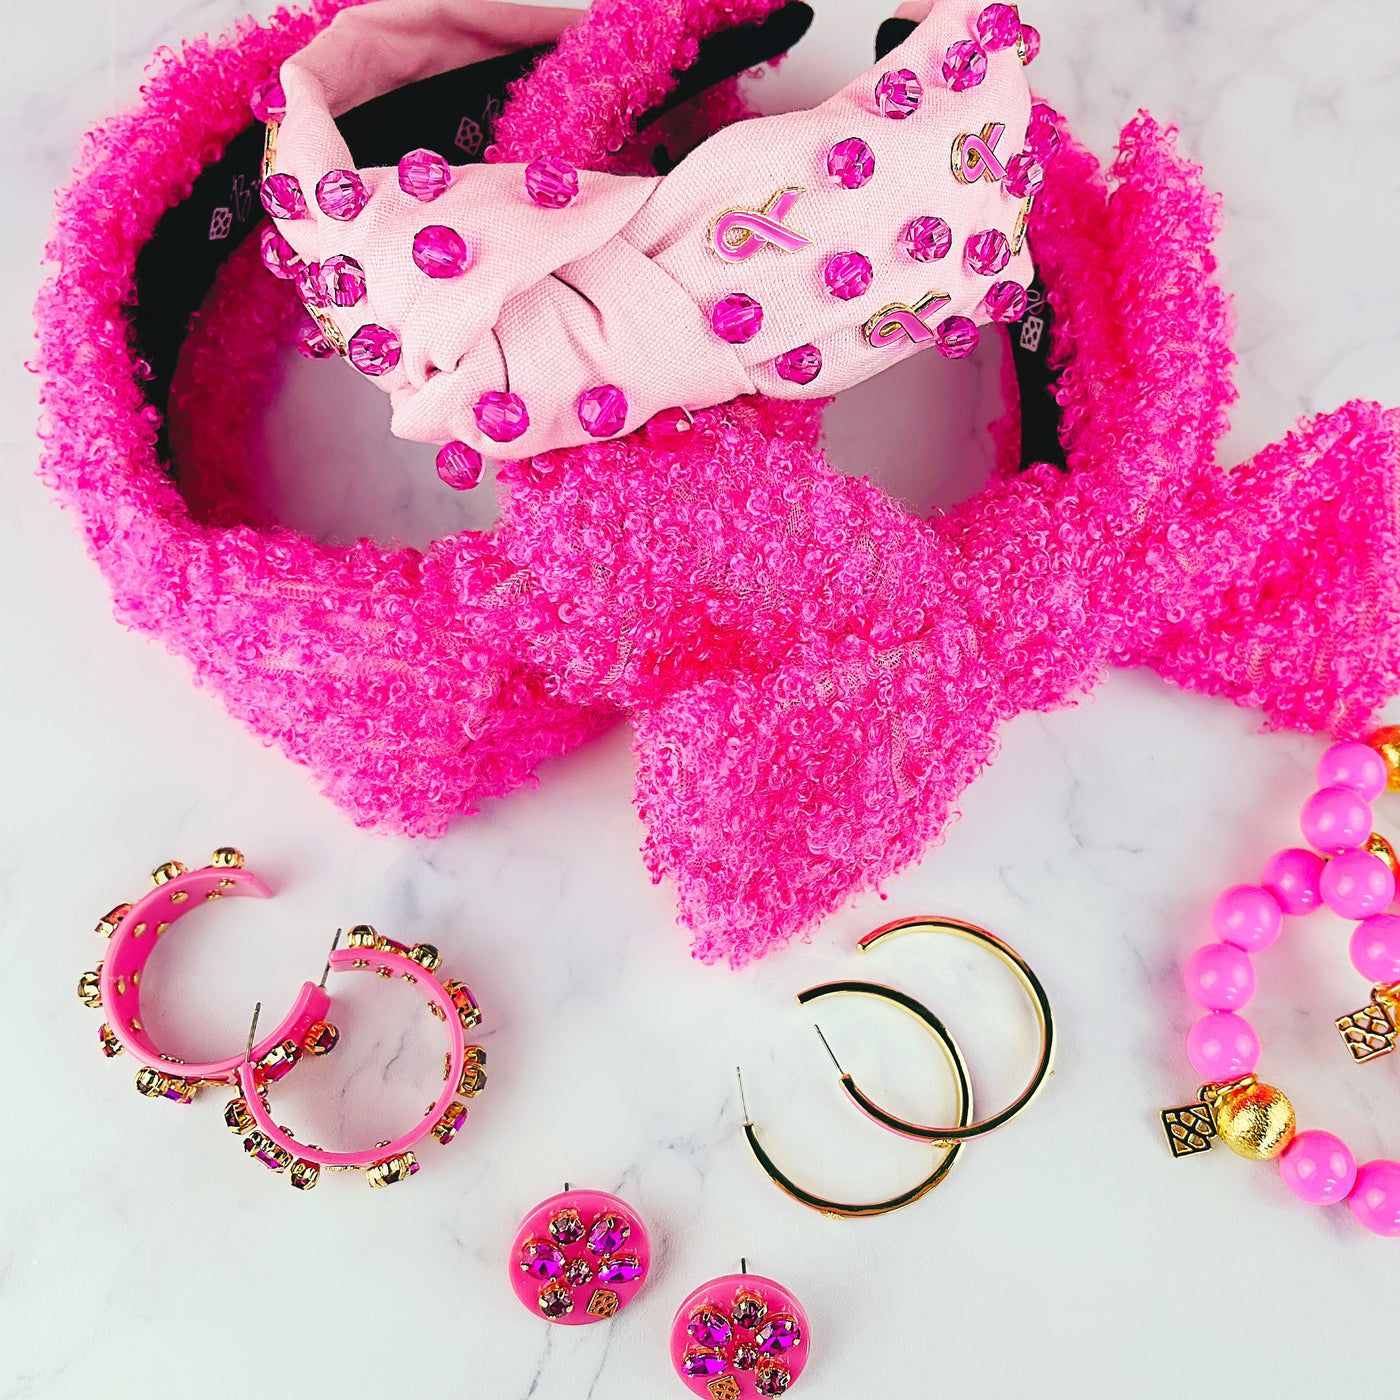 Breast Cancer Awareness Headband with Pink Stones and Charms